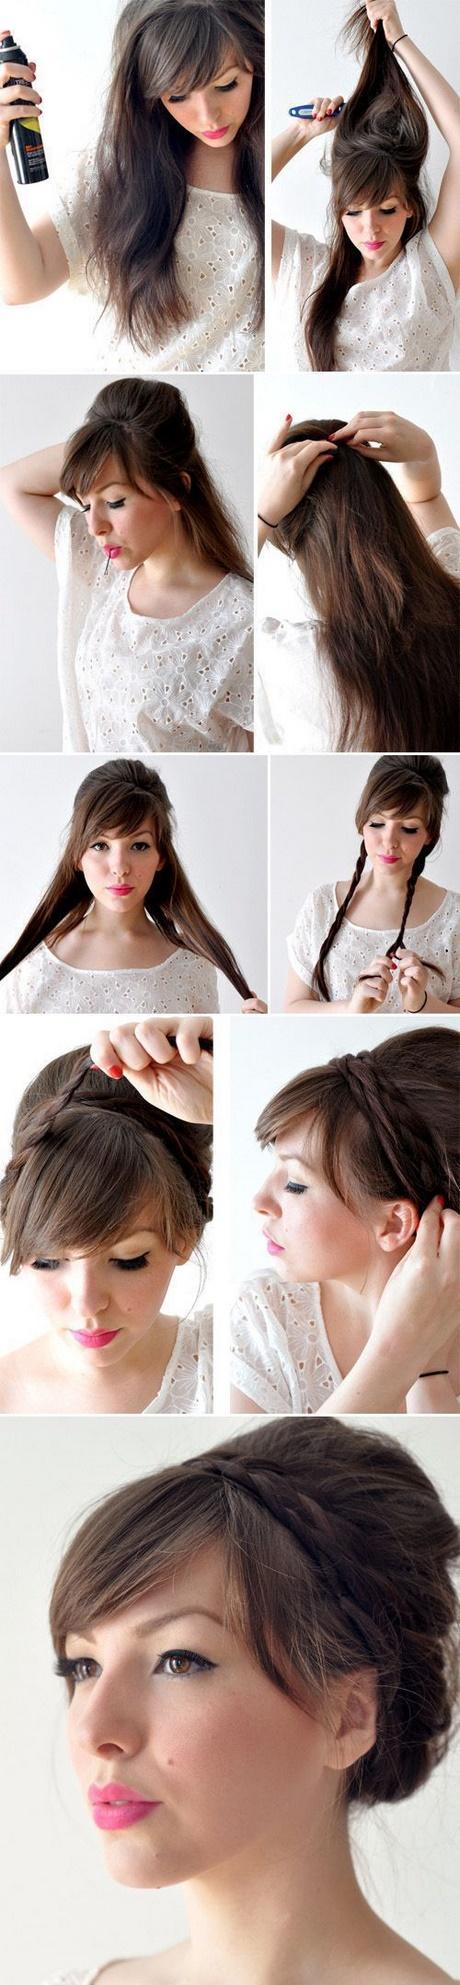 Easy and simple hairstyles to do at home easy-and-simple-hairstyles-to-do-at-home-79_15